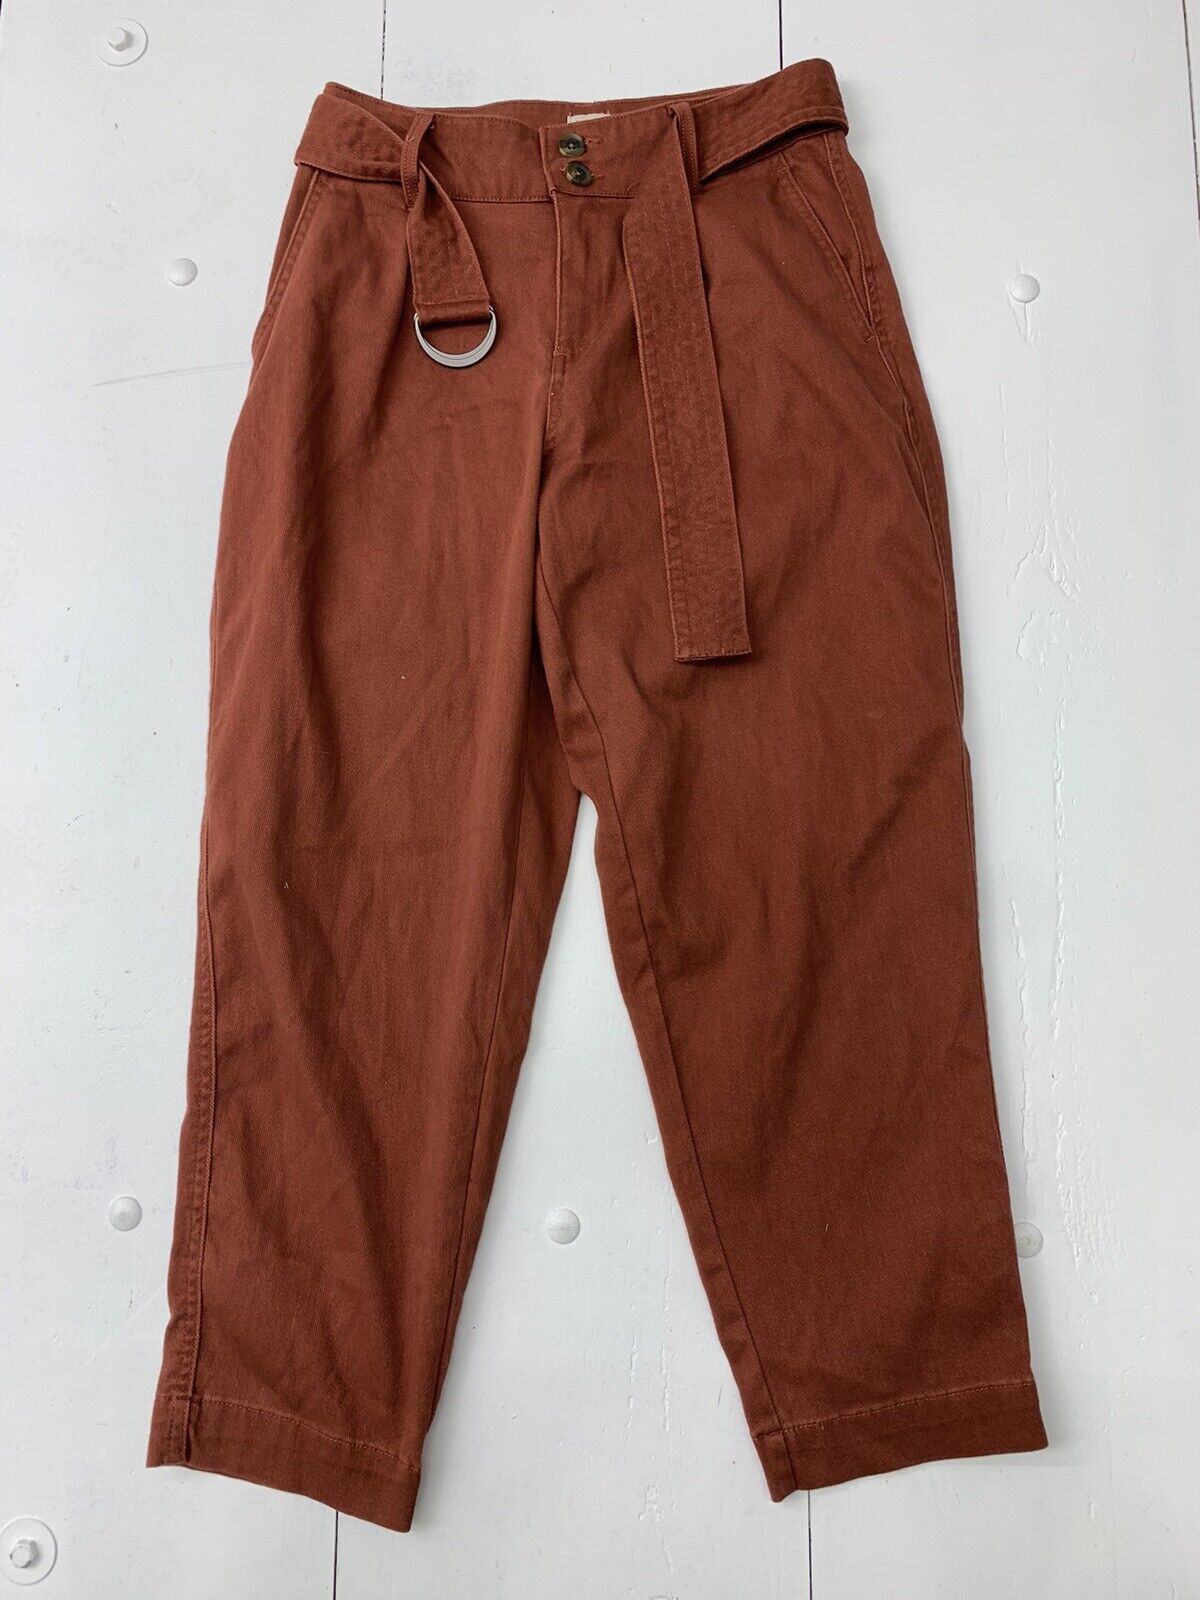 A New Day - Pants (Women's 4)